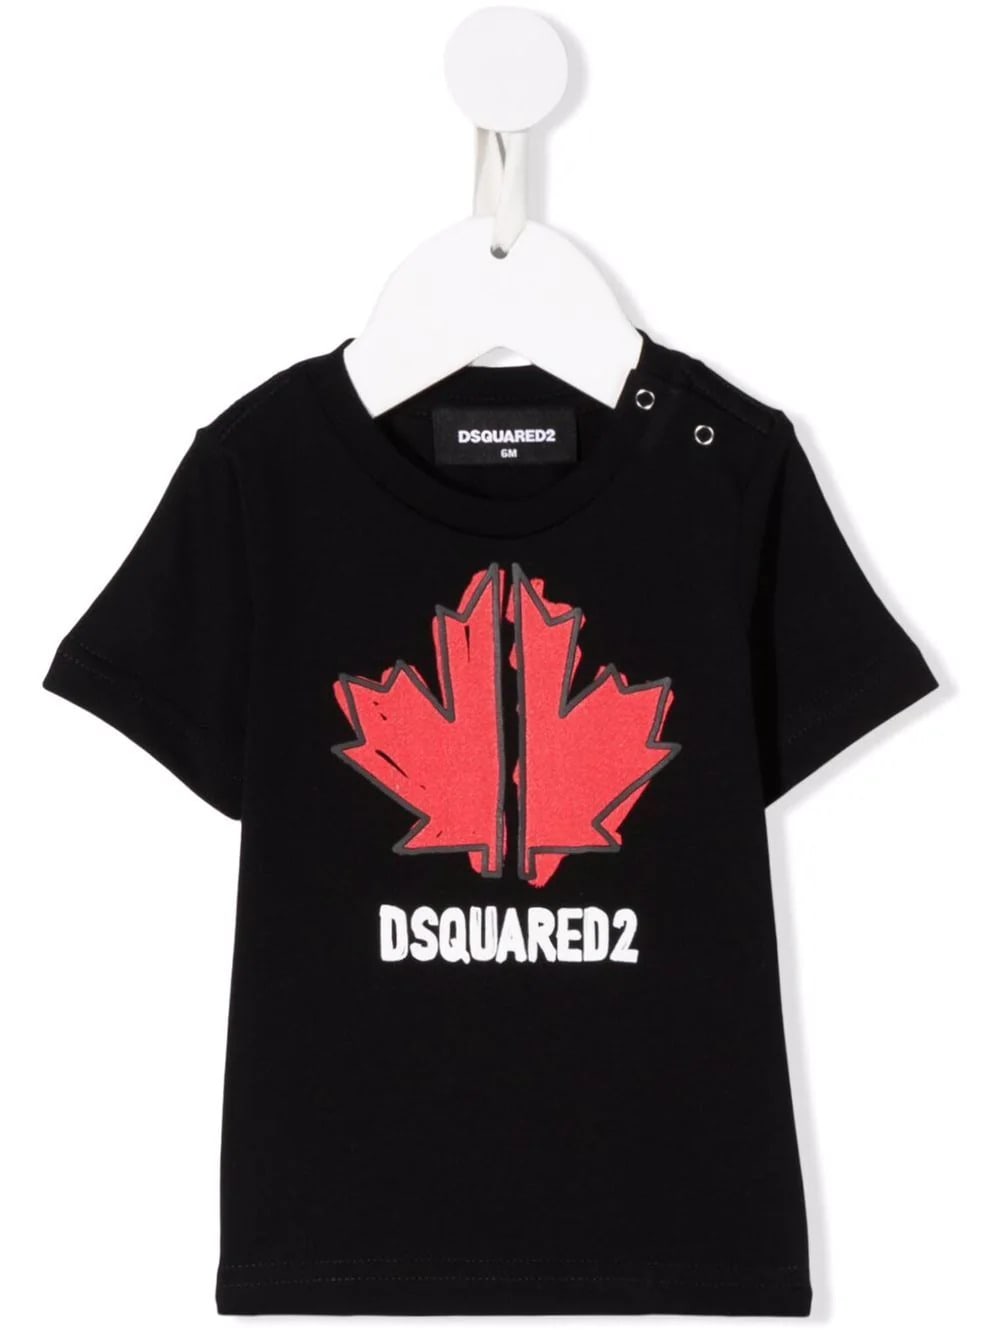 Dsquared2 Kids Black T-shirt With Front And Back Sport Edtn.05 Print